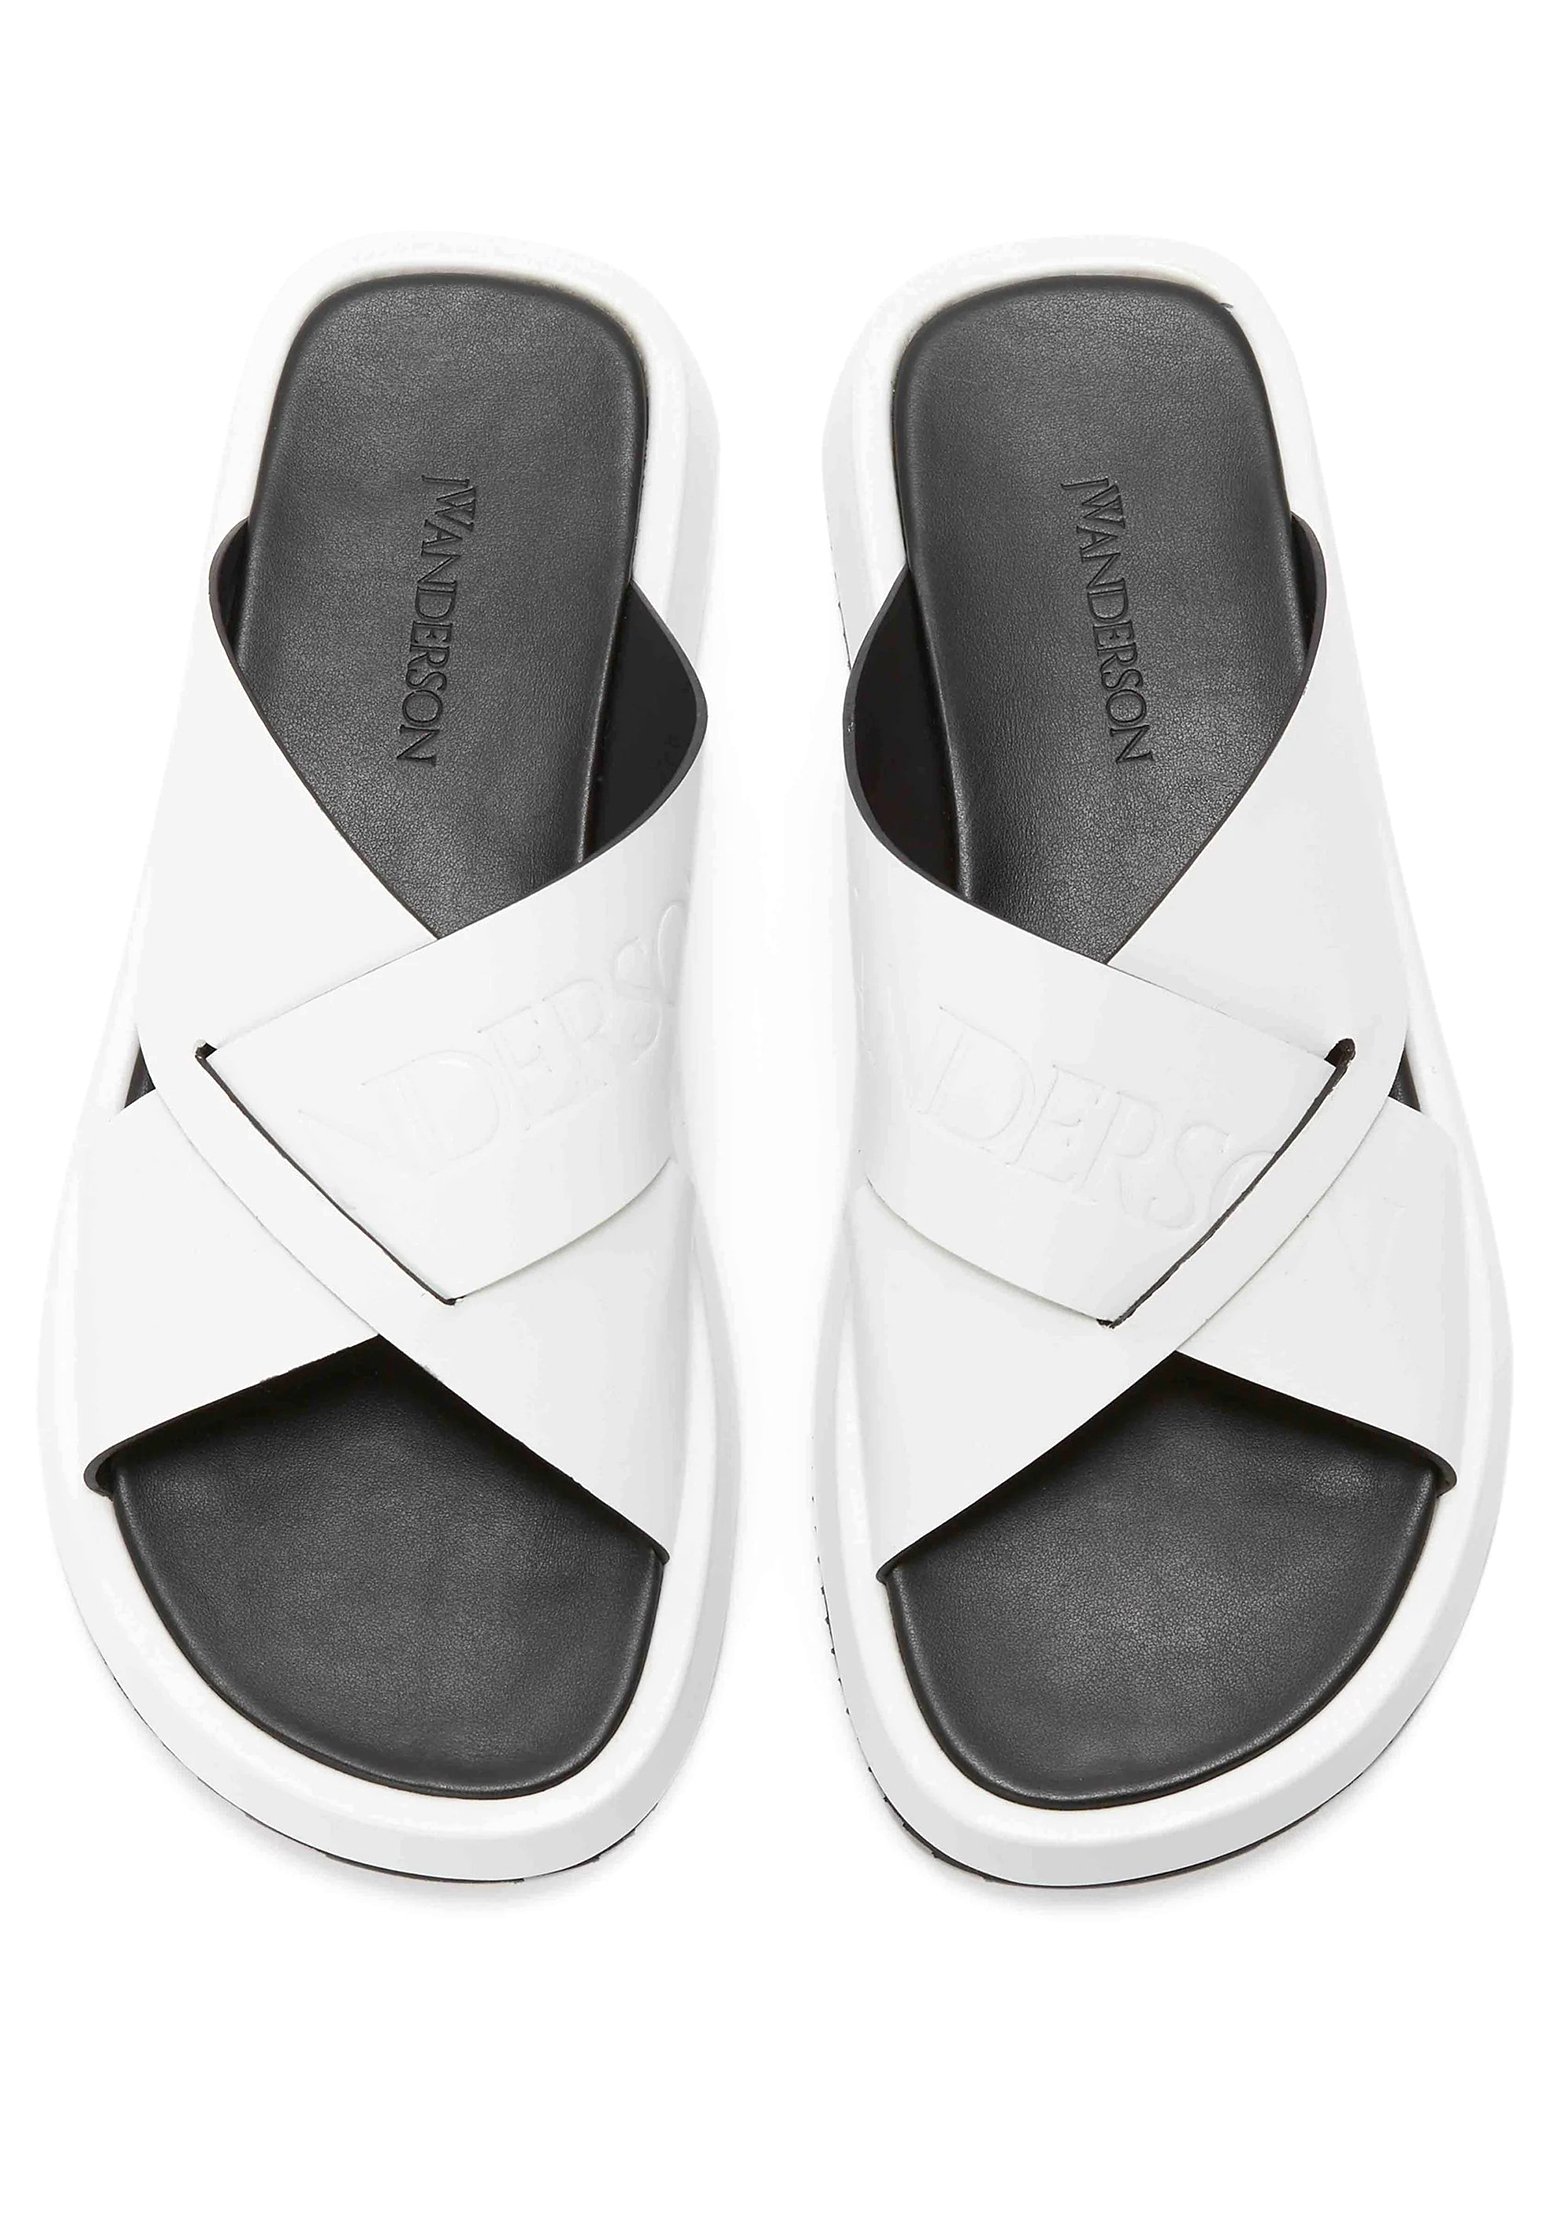 Slides J.W. ANDERSON Color: white (Code: 739) in online store Allure